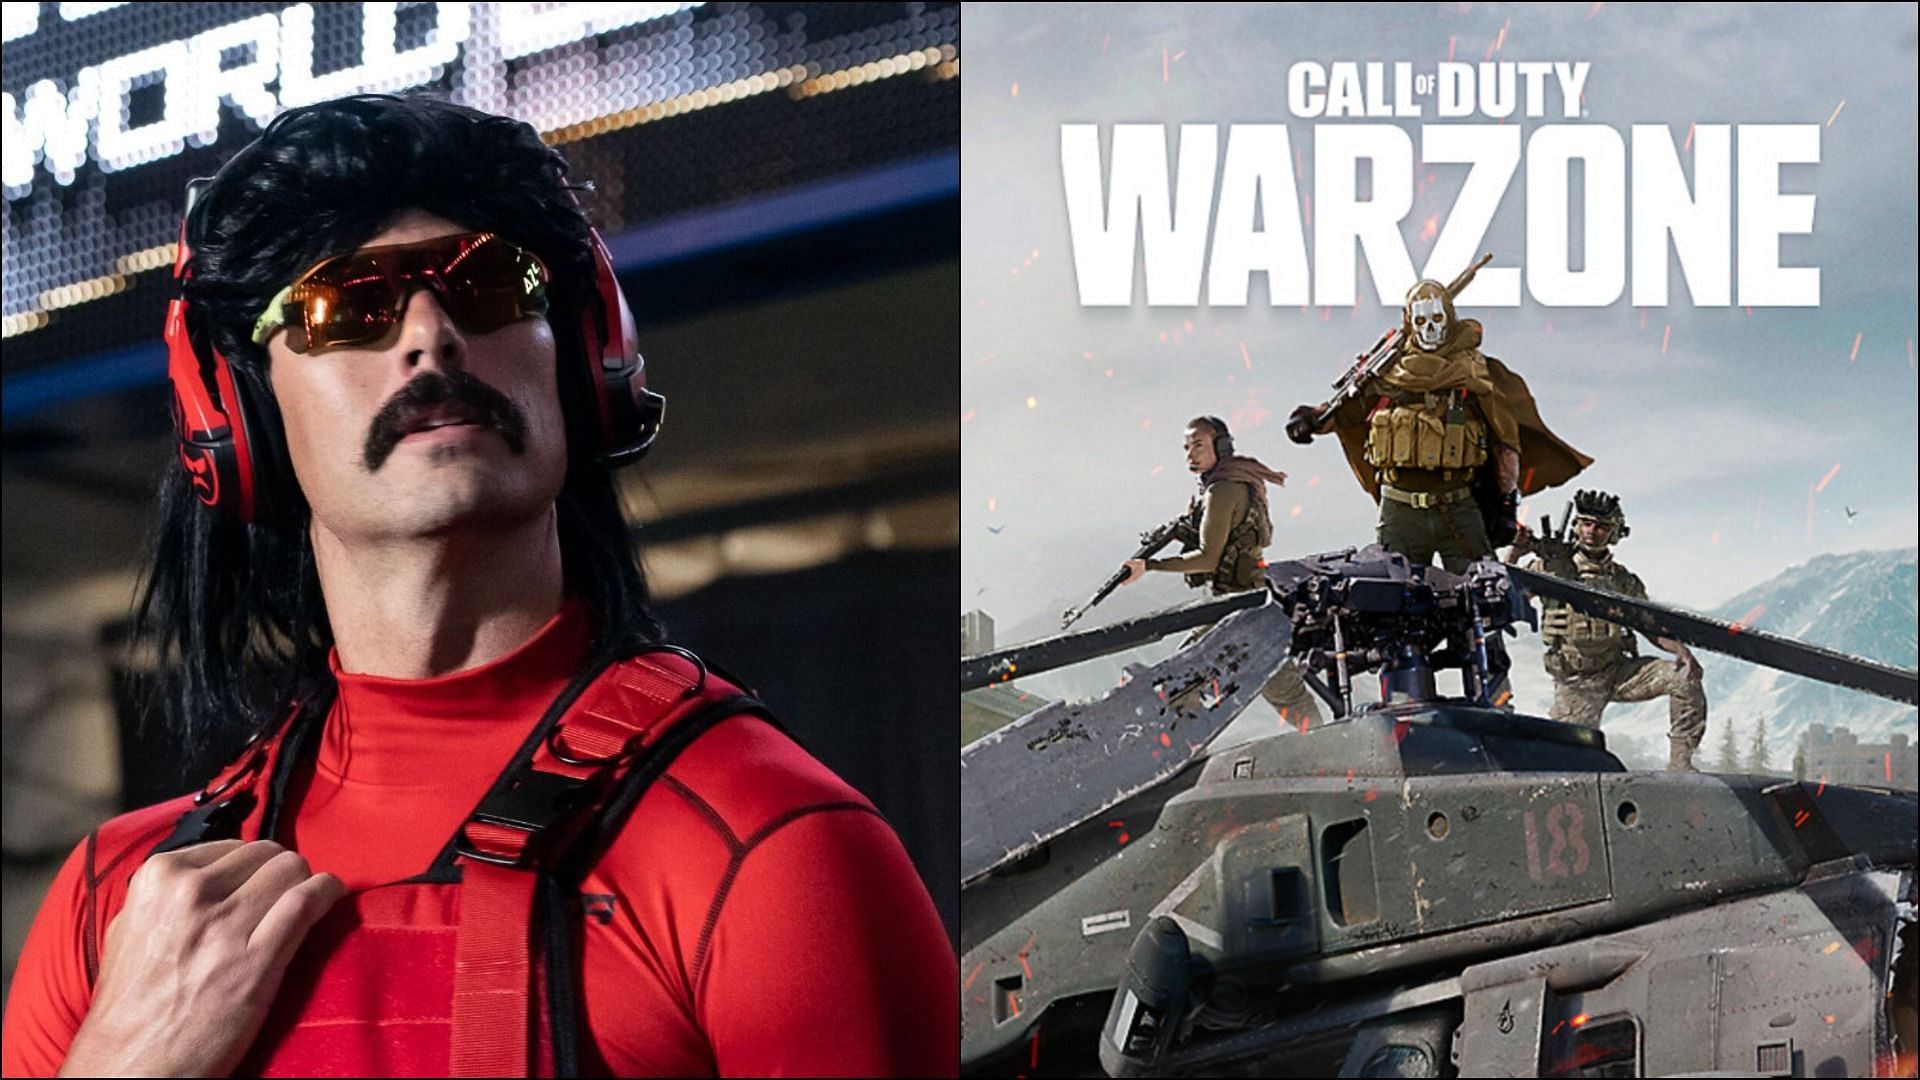 Dr DisRespect gives a heated take on the new Warzone anti-cheat system (Image via Sportskeeda)